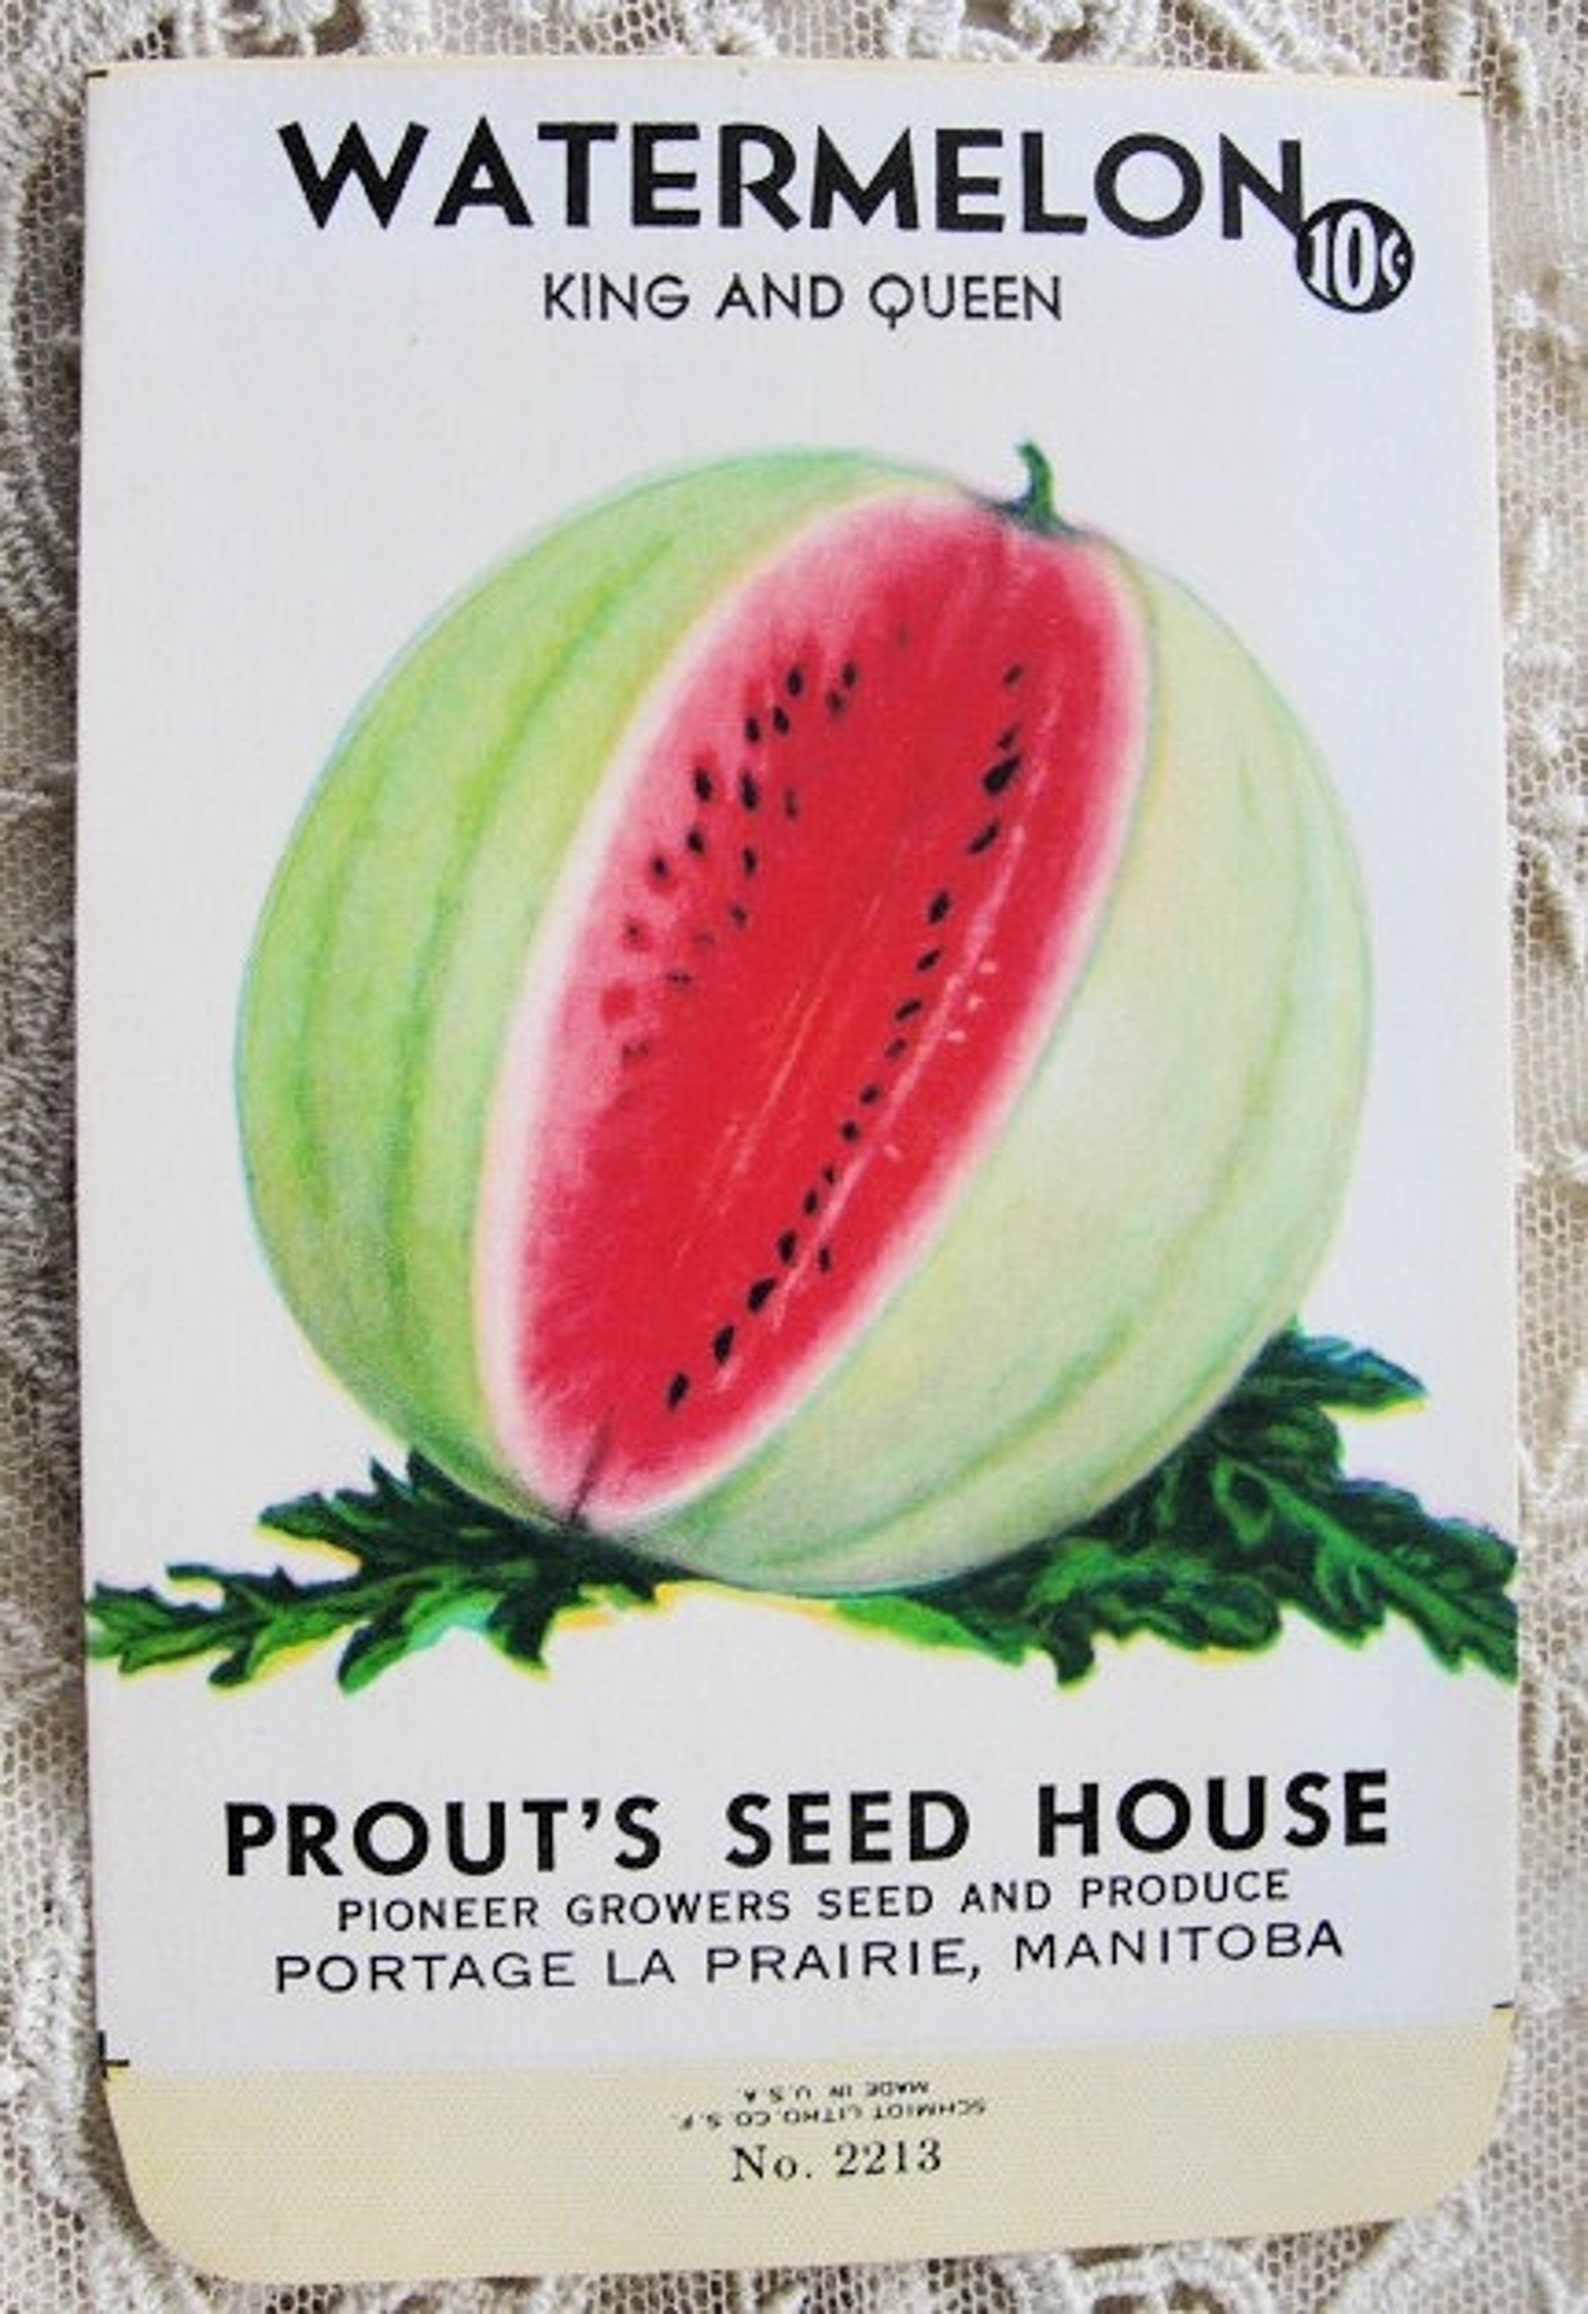 Antique 30s Seed Packet Colorful Watermelon Suitable To Frame Cottage Chic,French Country,Farmhouse Decor,Scrapbooking Crafts Weddings Gifts